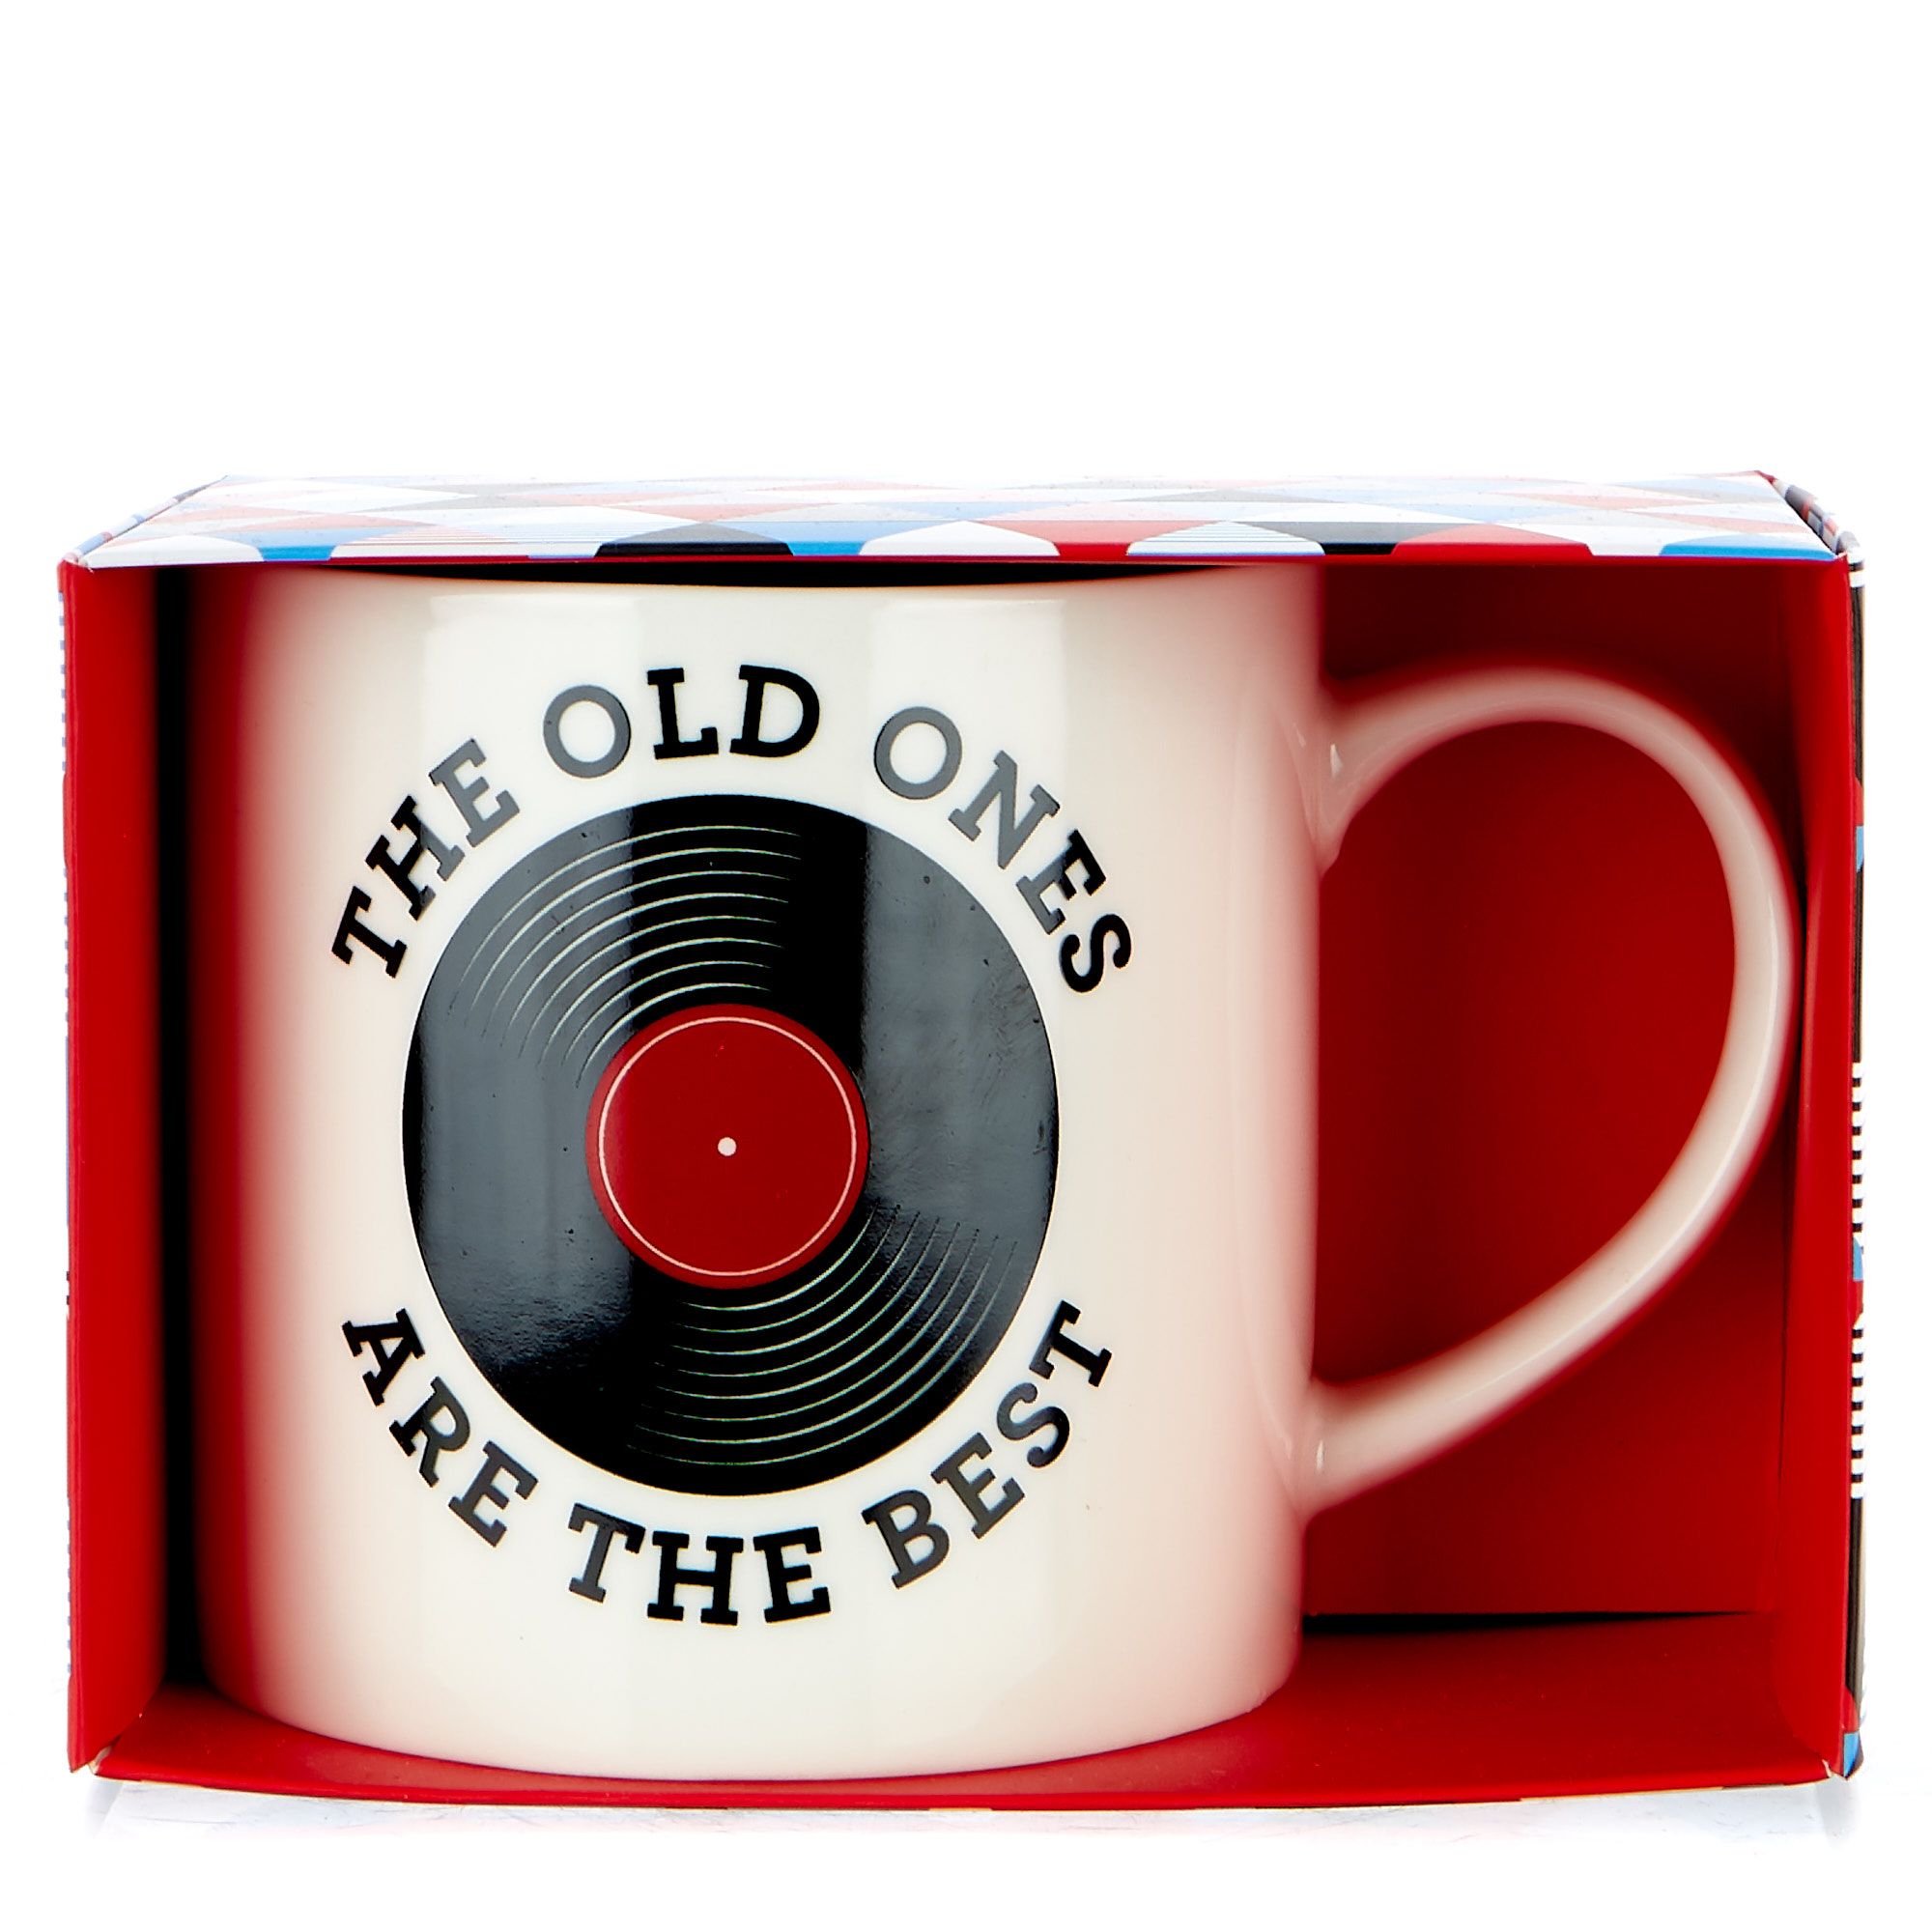 The Old Ones Are The Best Mug